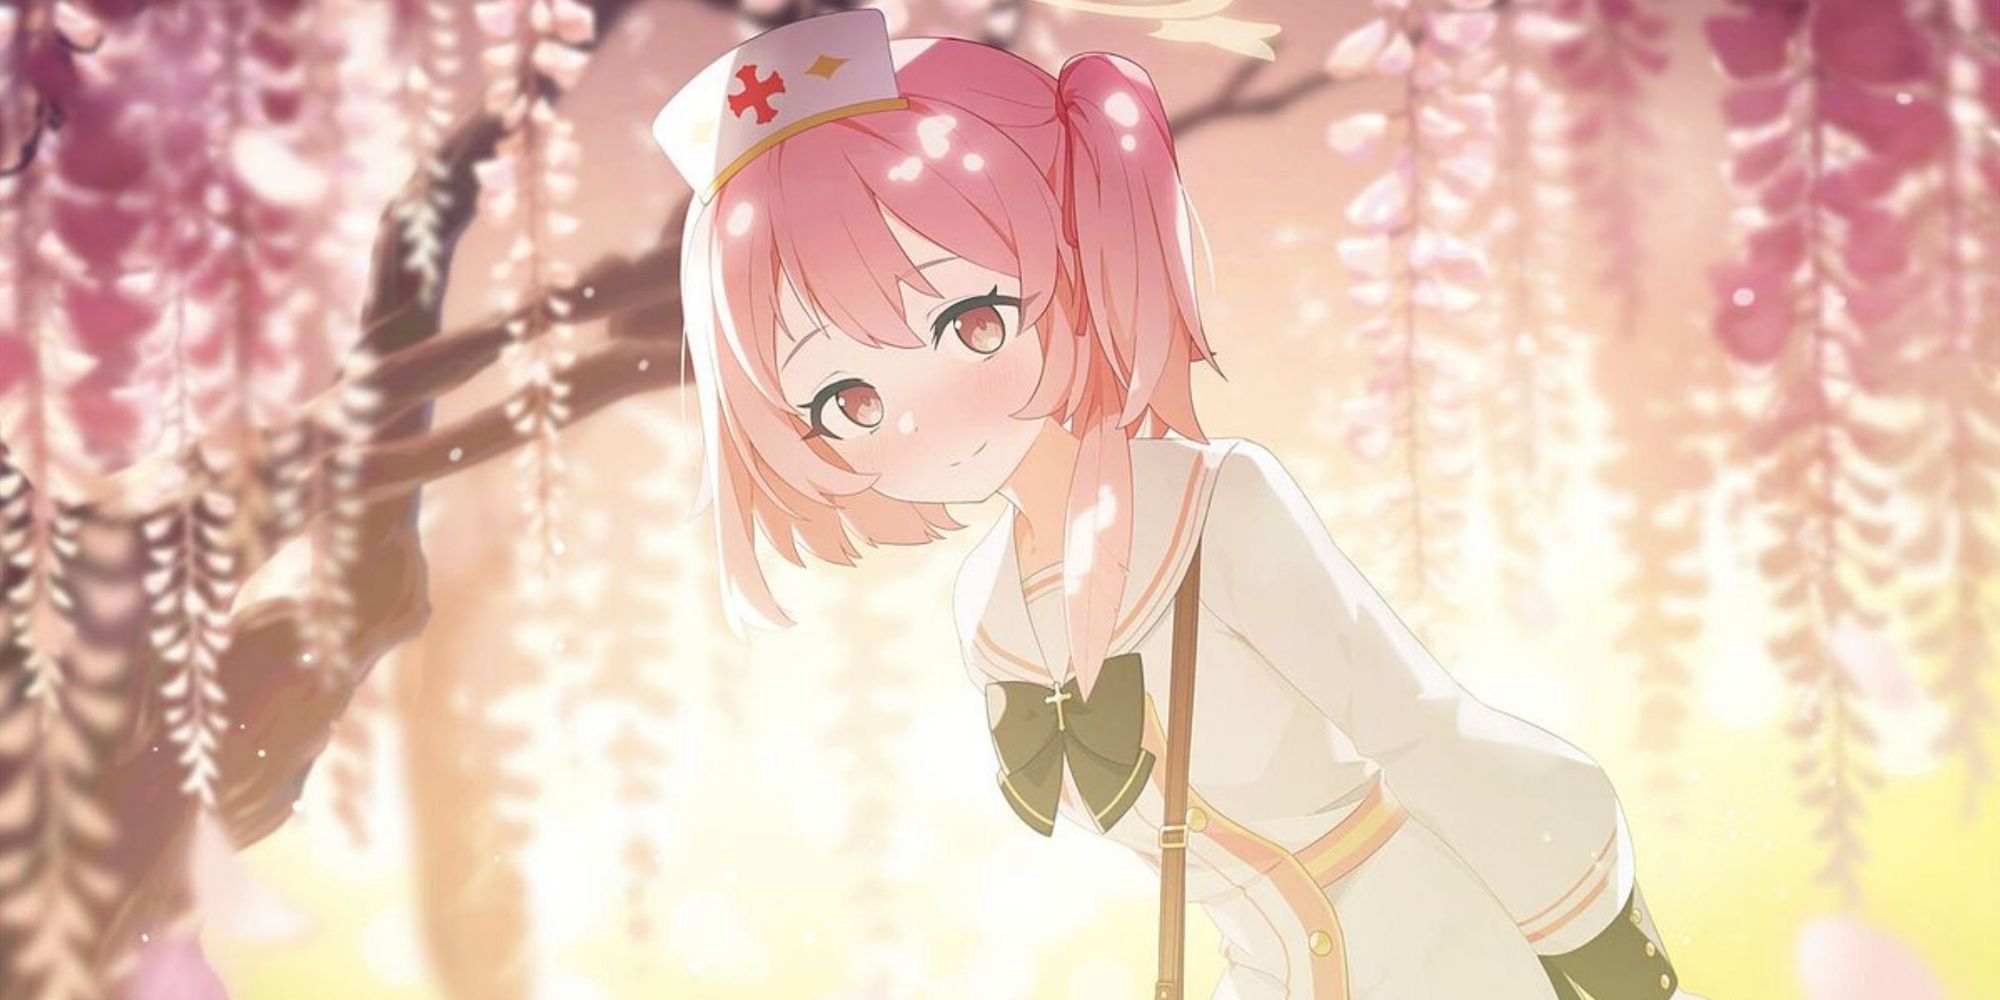 Sumi Serina Blushing in a nurse outfit with sakura tree in background